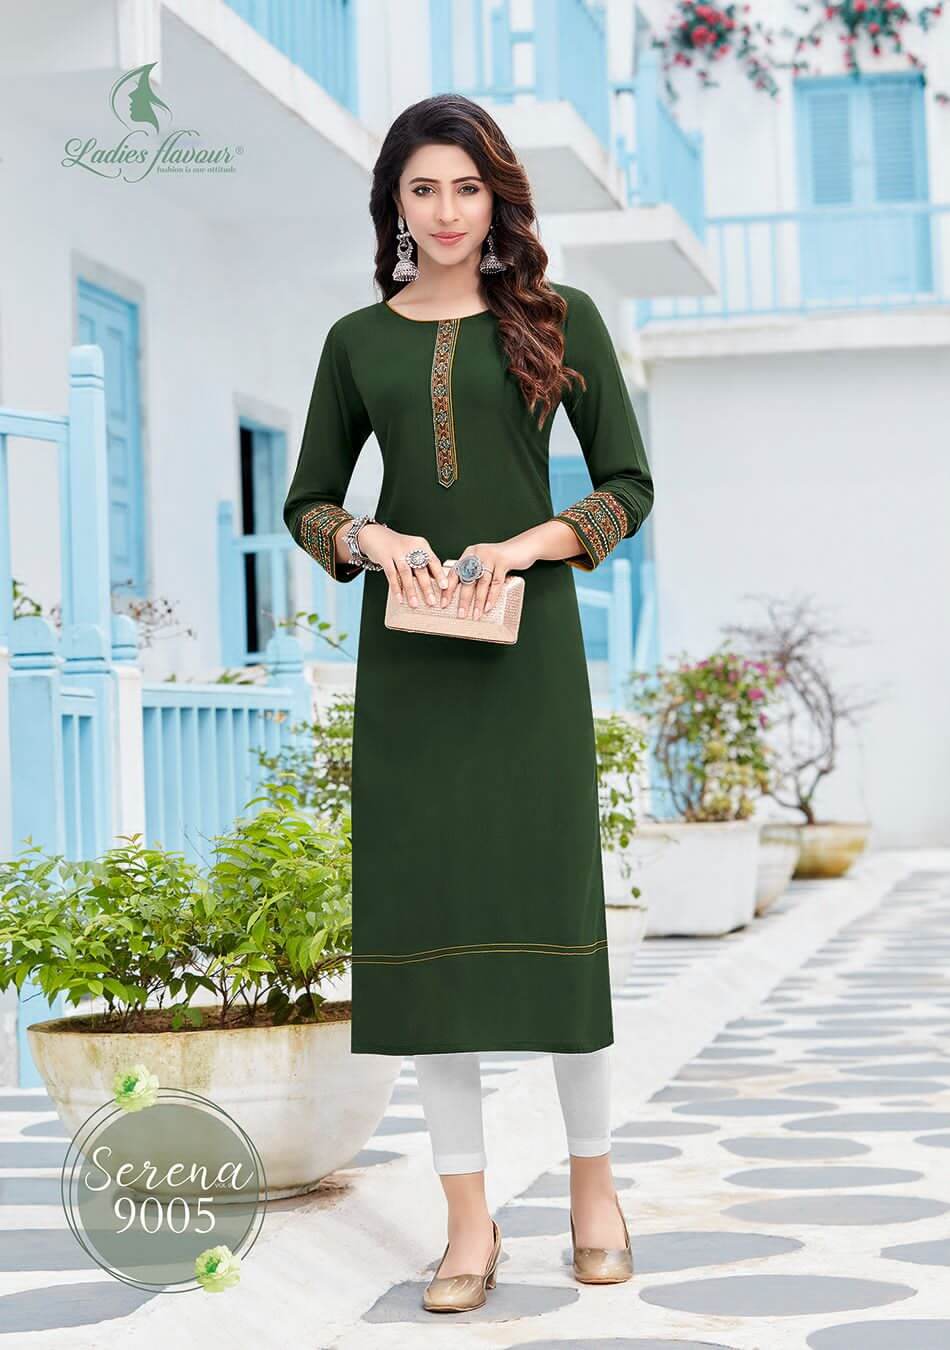 Ladies Flavour Serena Vol 9 Embroidery Kurti Catalog collection 4